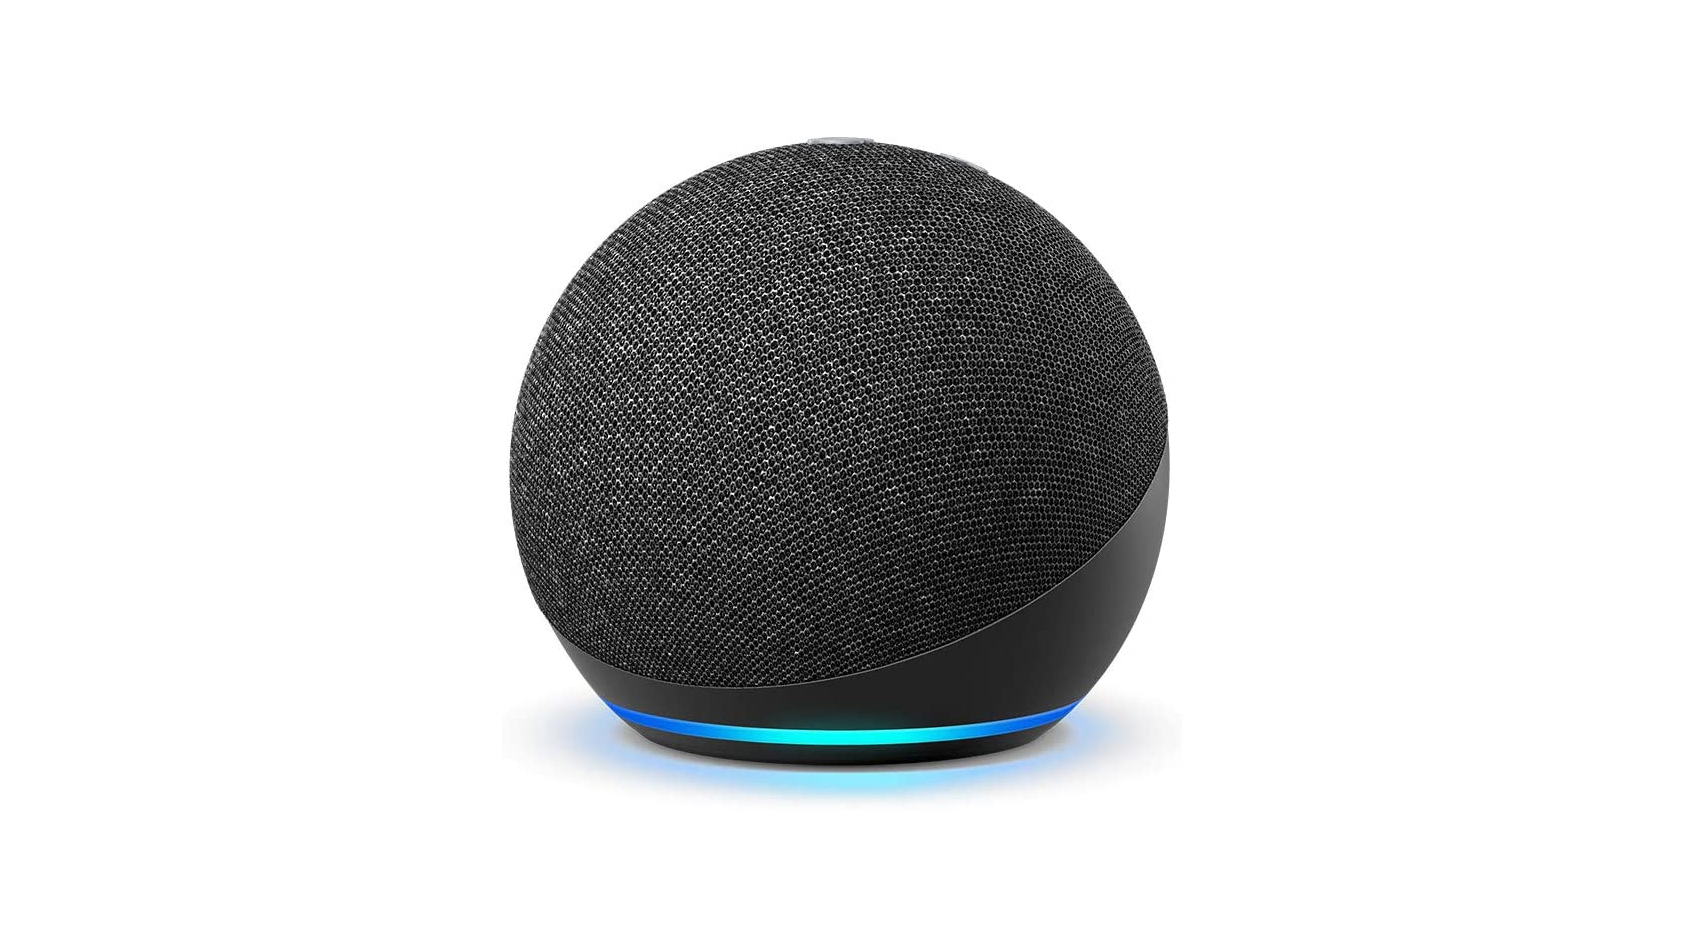 The Amazon Echo Dot (4th Gen) in black against a white background.